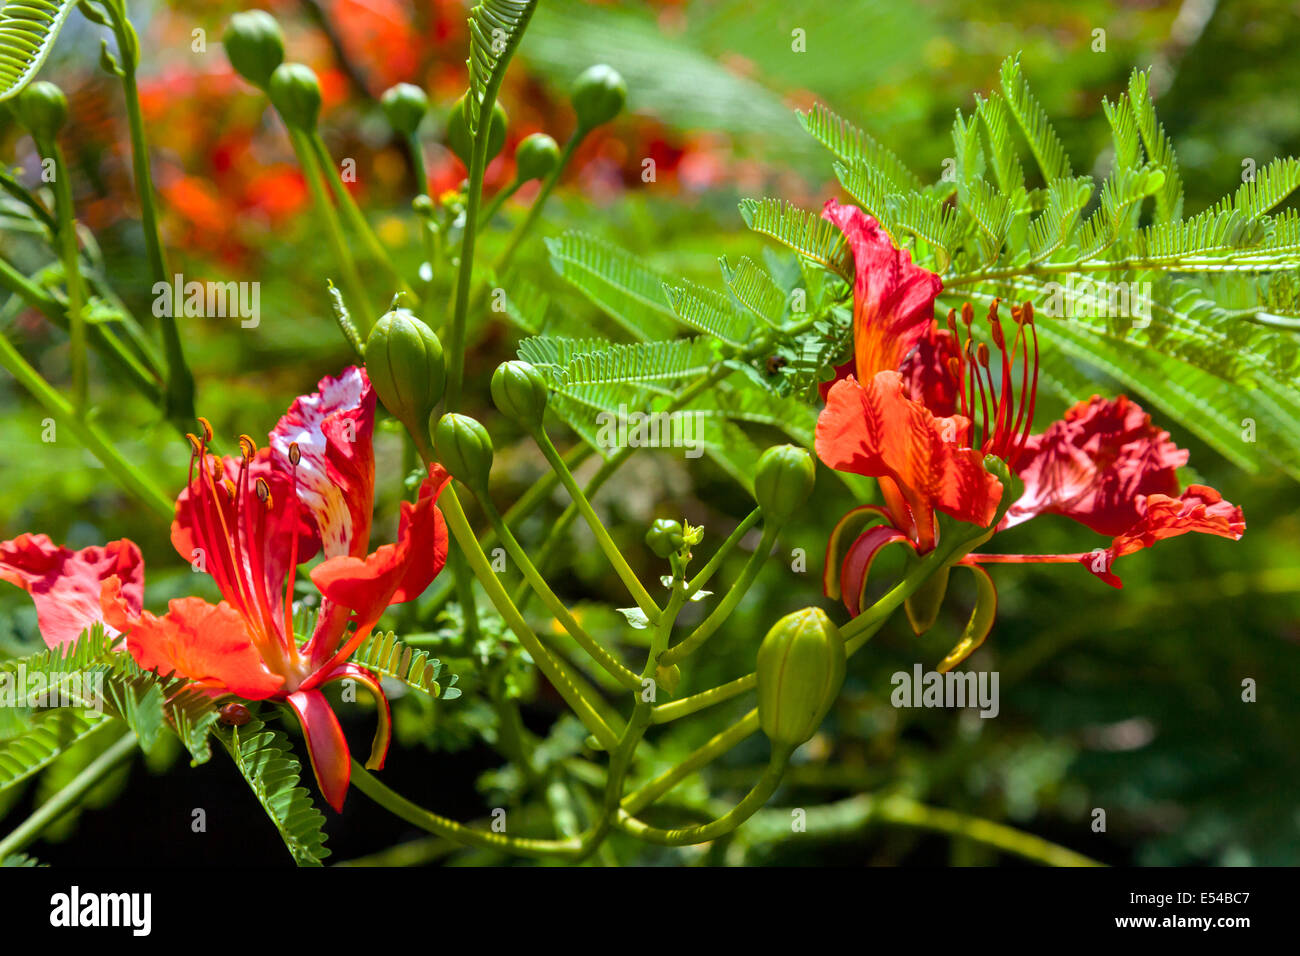 Brilliant orange red flowers and buds on an ornamental Flame tree (Delonix regia) at local nursery in Fort Lauderdale, Florida. Stock Photo